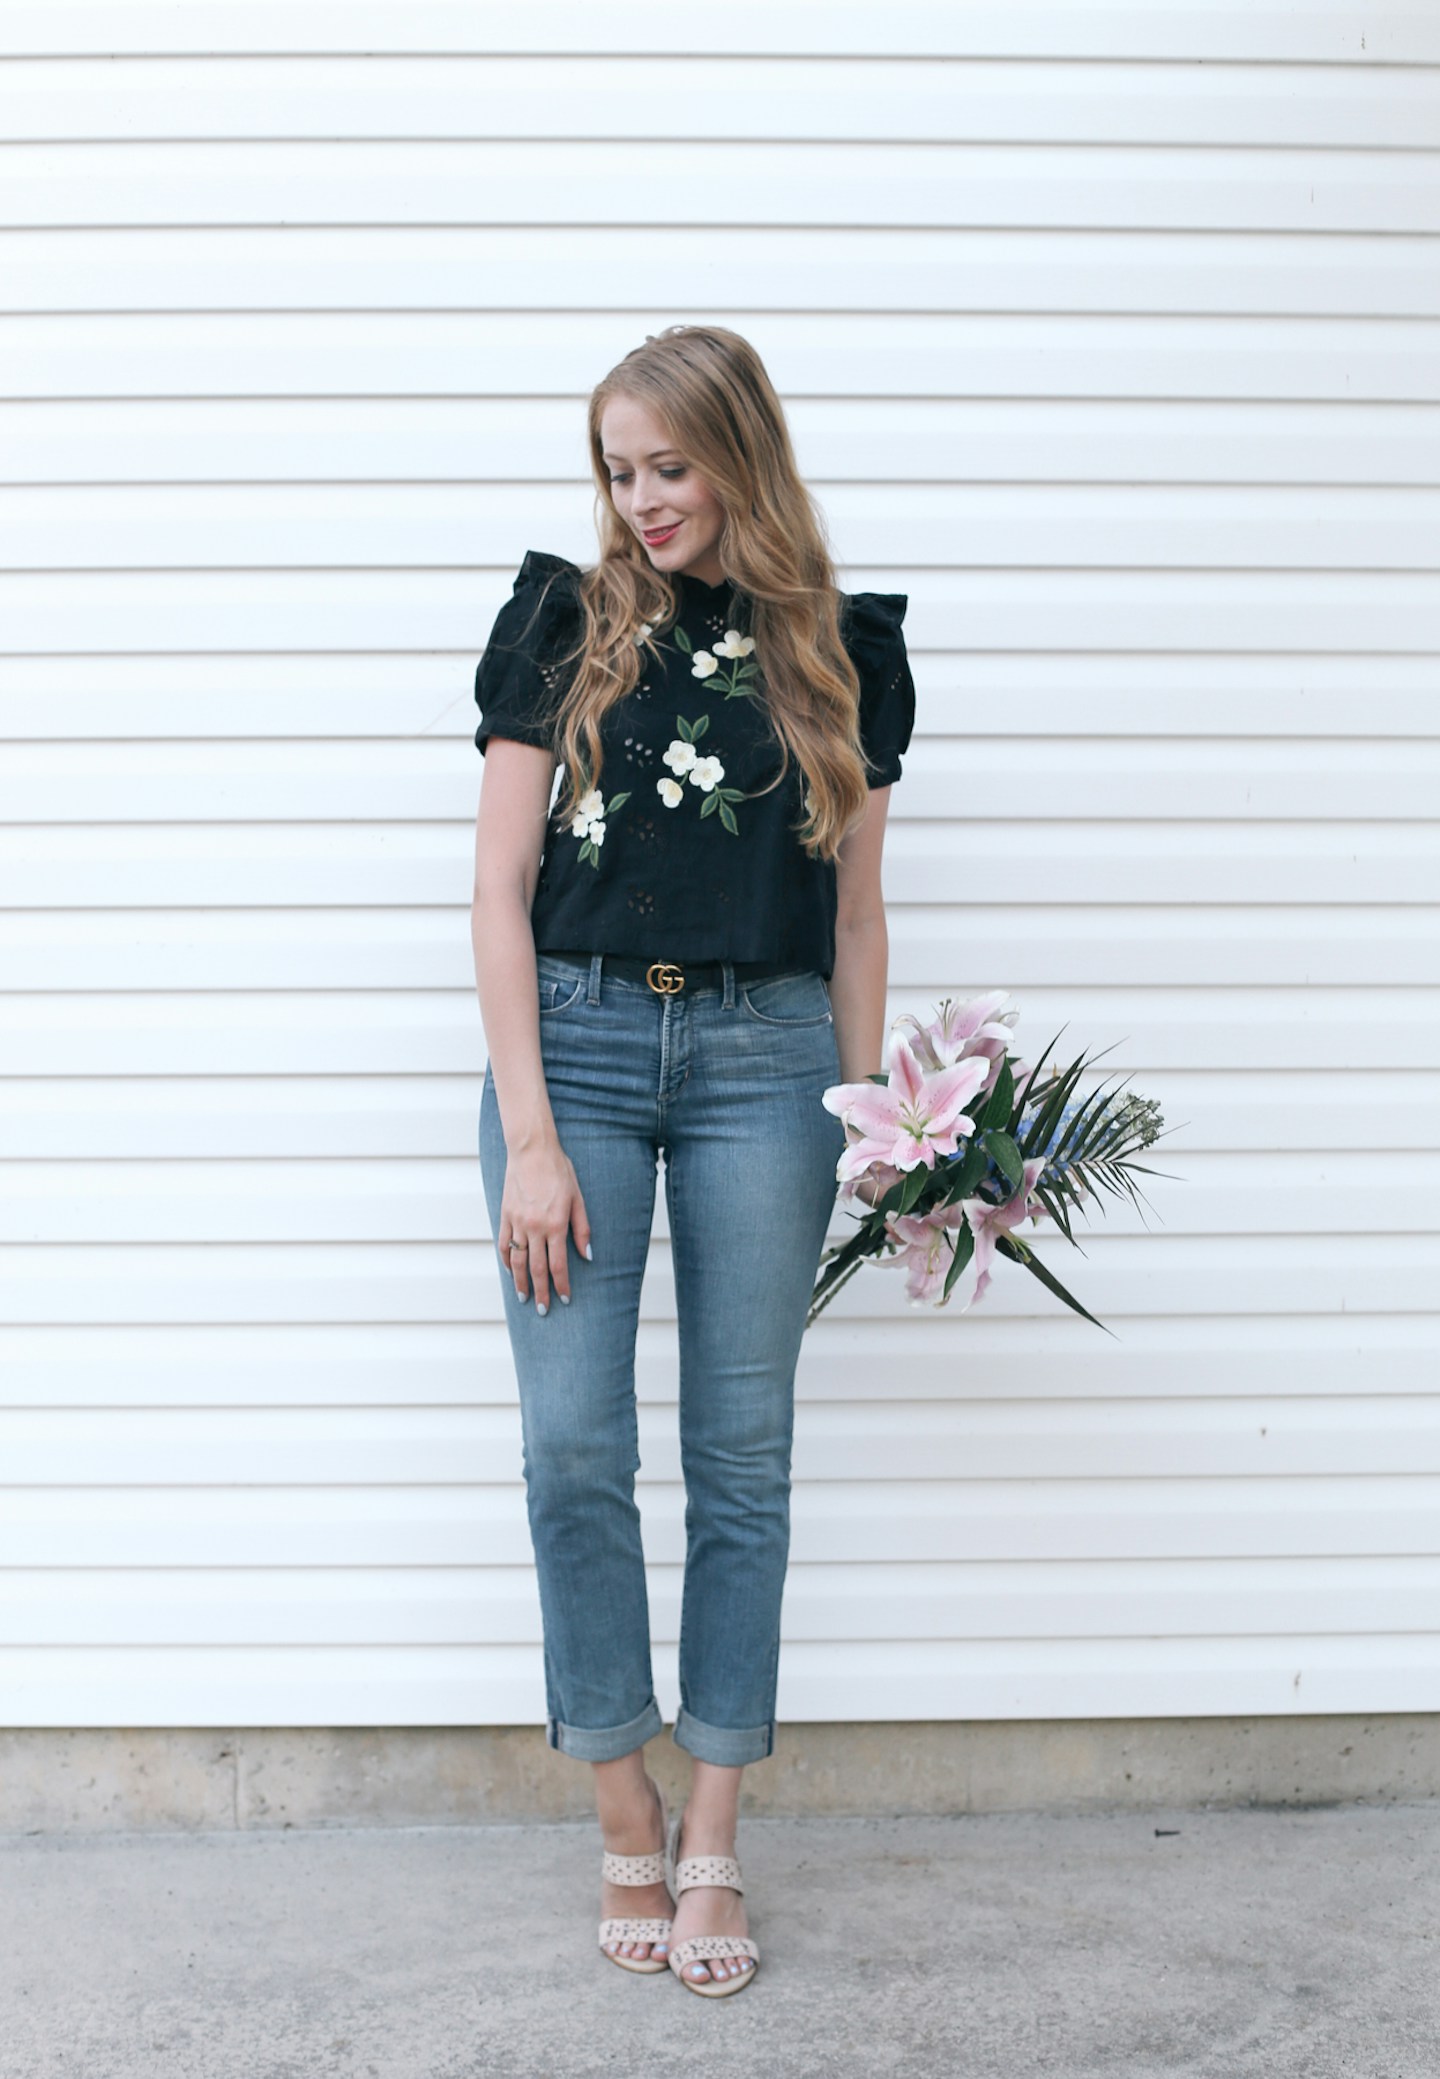 How to Look One Size Smaller in Jeans